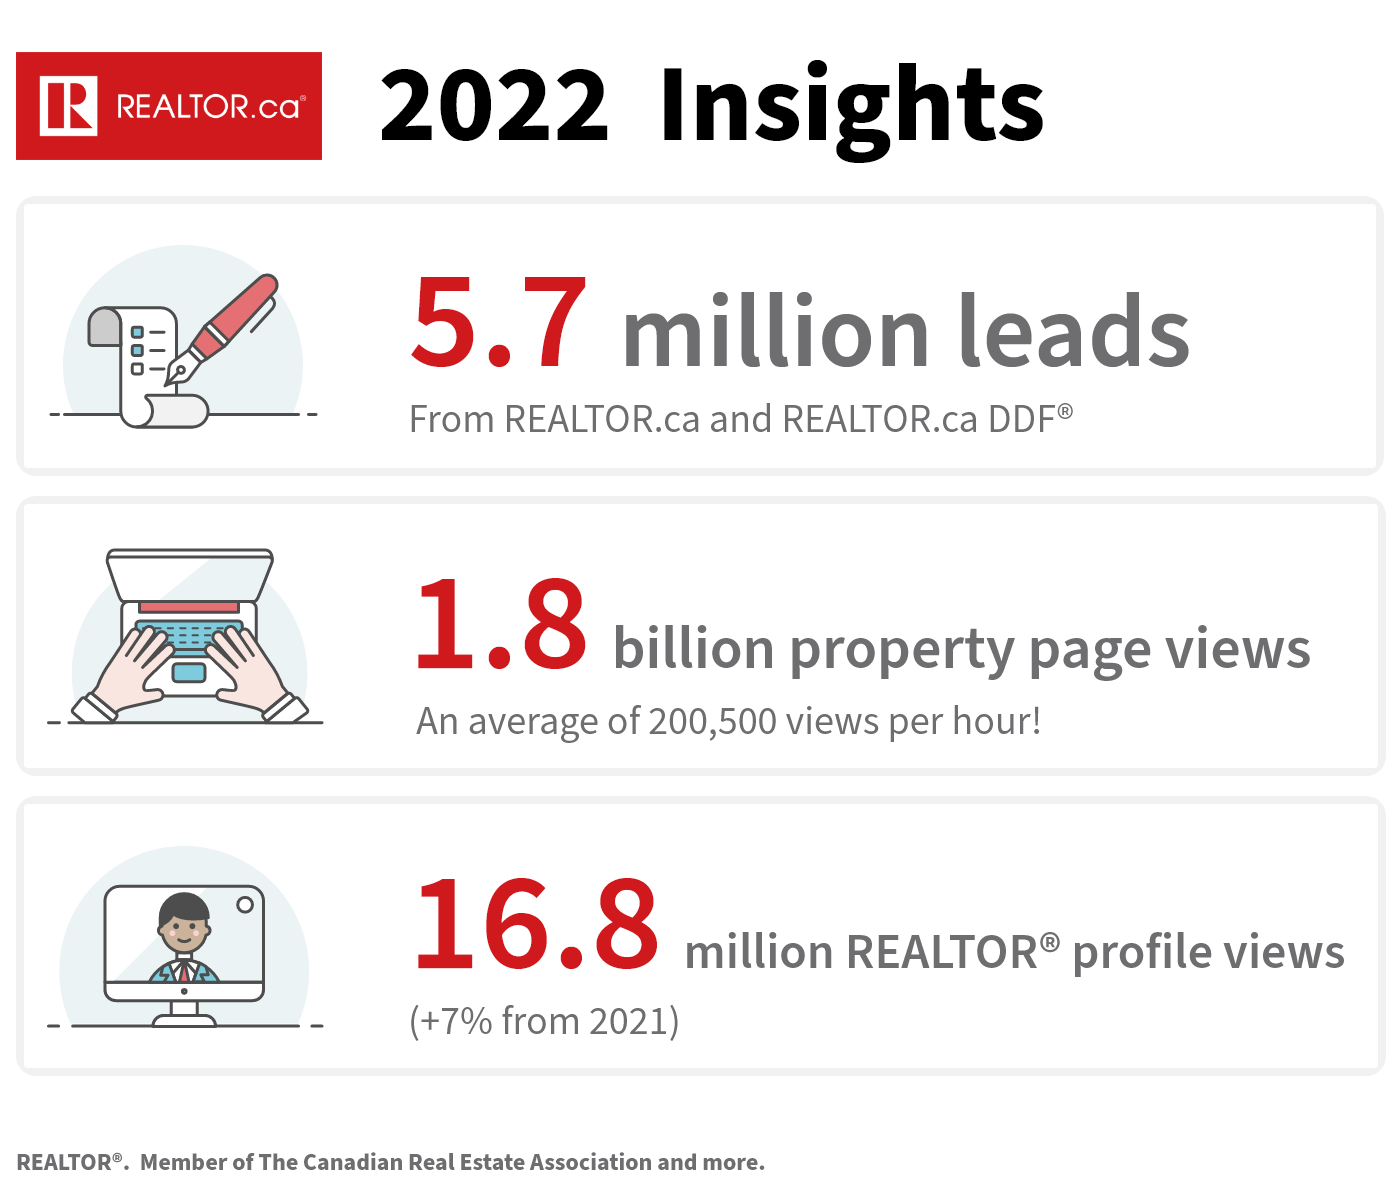 In 2022, REALTOR.ca and REALTOR.ca DDF® sent 5.7 million leads to REALTORS®, received 1.8 billion property page views, and  16.8 million REALTOR® profile views.